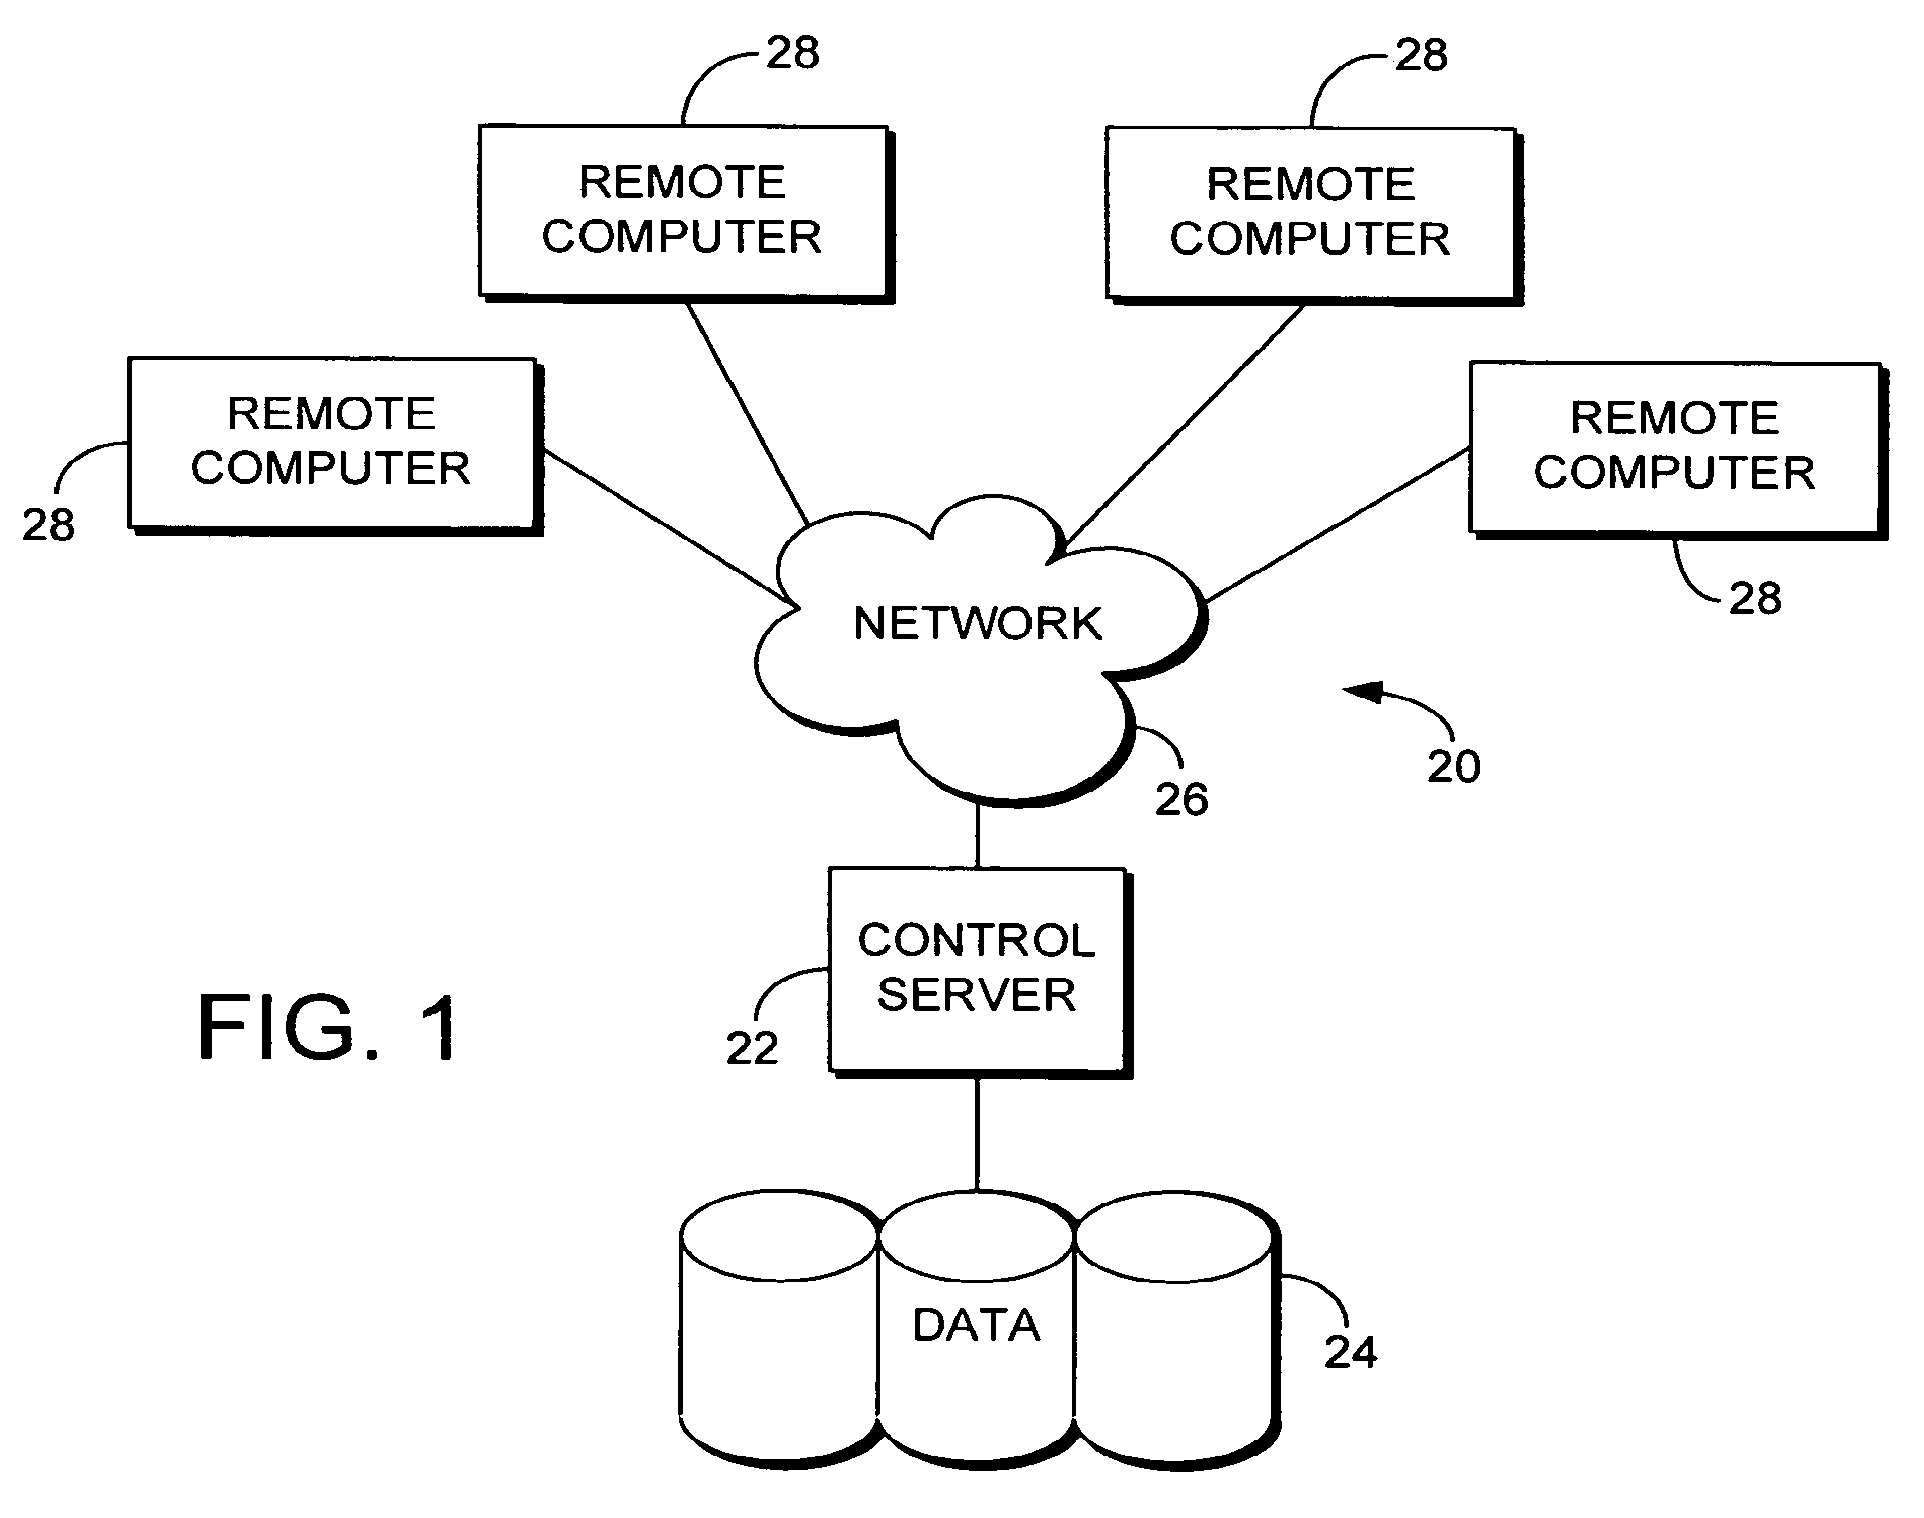 System and method for automatically notifying a blood bank database of blood product administration and transfusion